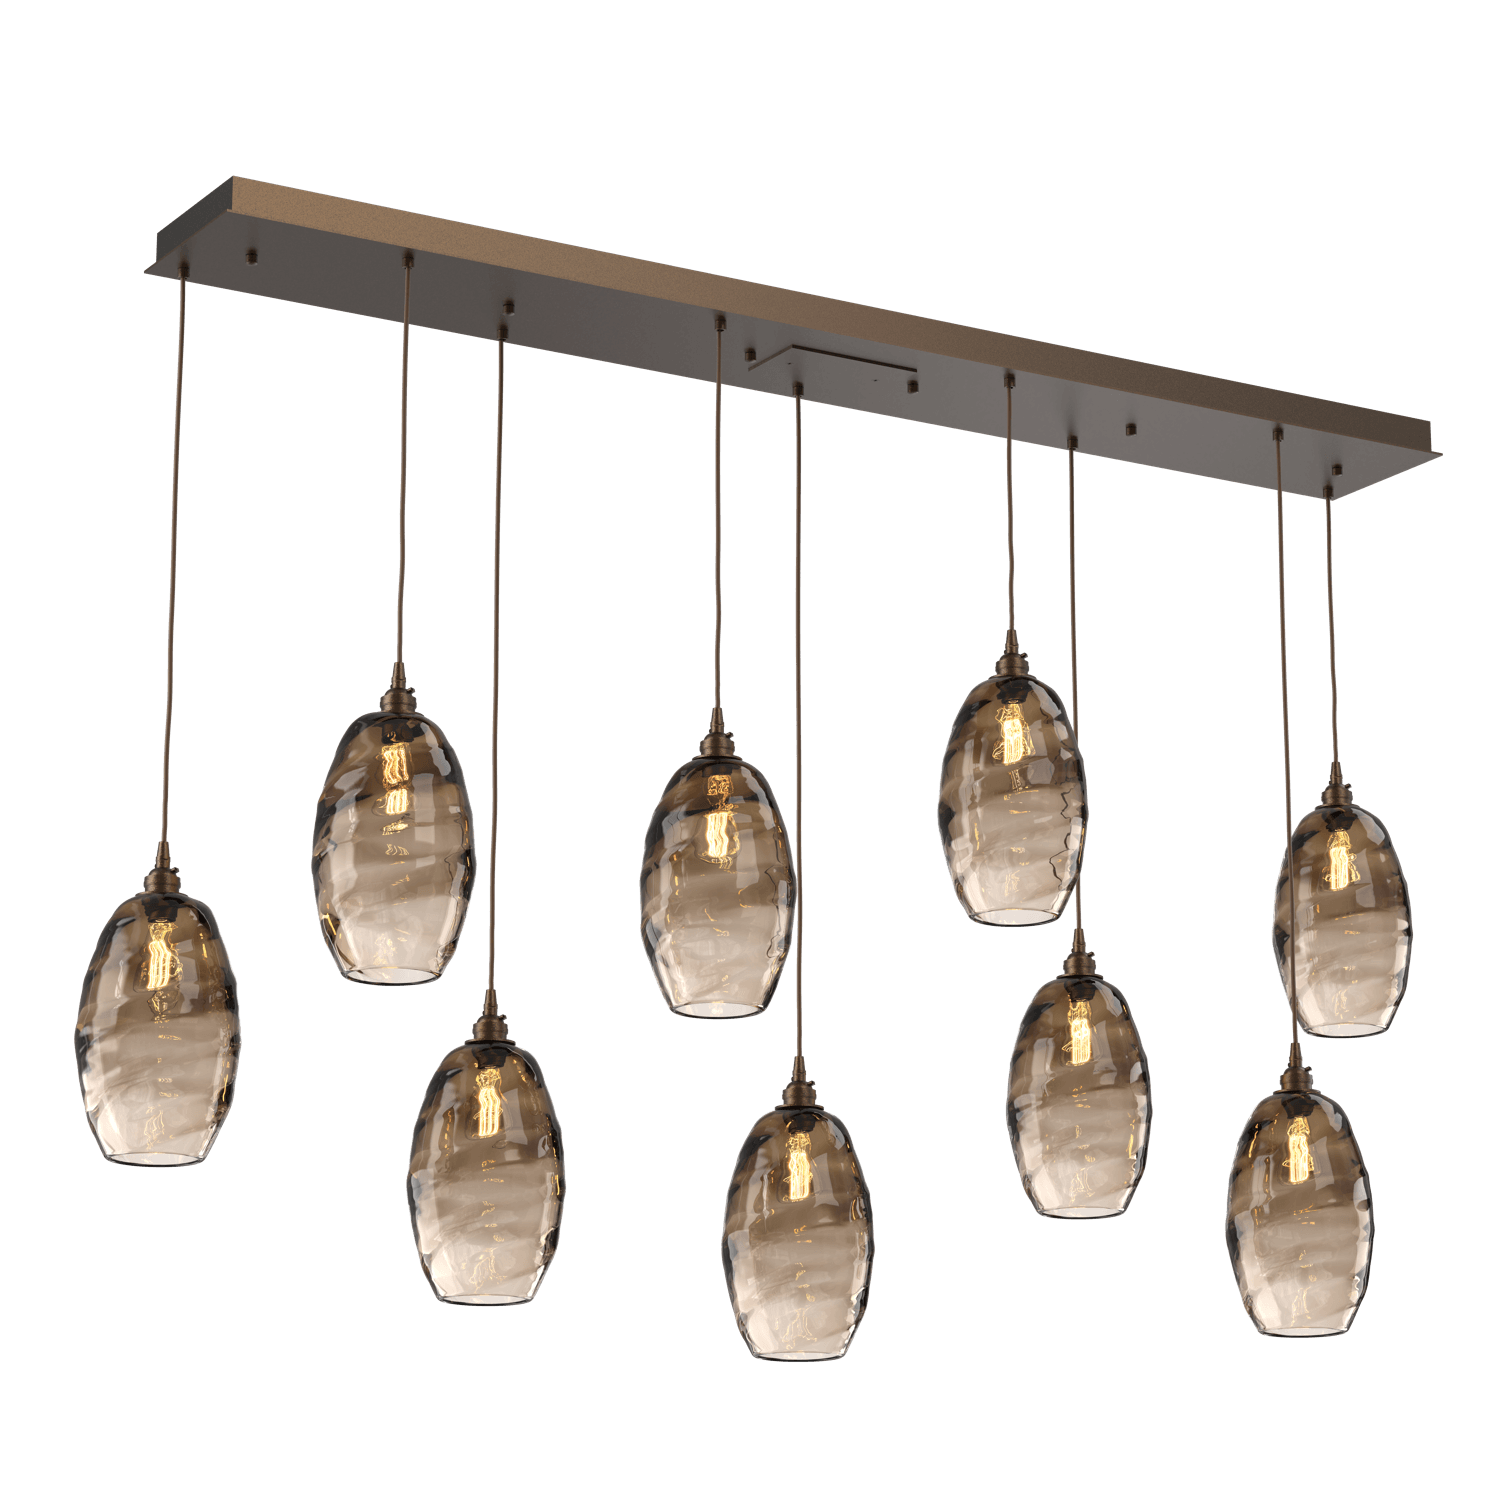 PLB0035-09-FB-OB-Hammerton-Studio-Optic-Blown-Glass-Elisse-9-light-linear-pendant-chandelier-with-flat-bronze-finish-and-optic-bronze-blown-glass-shades-and-incandescent-lamping